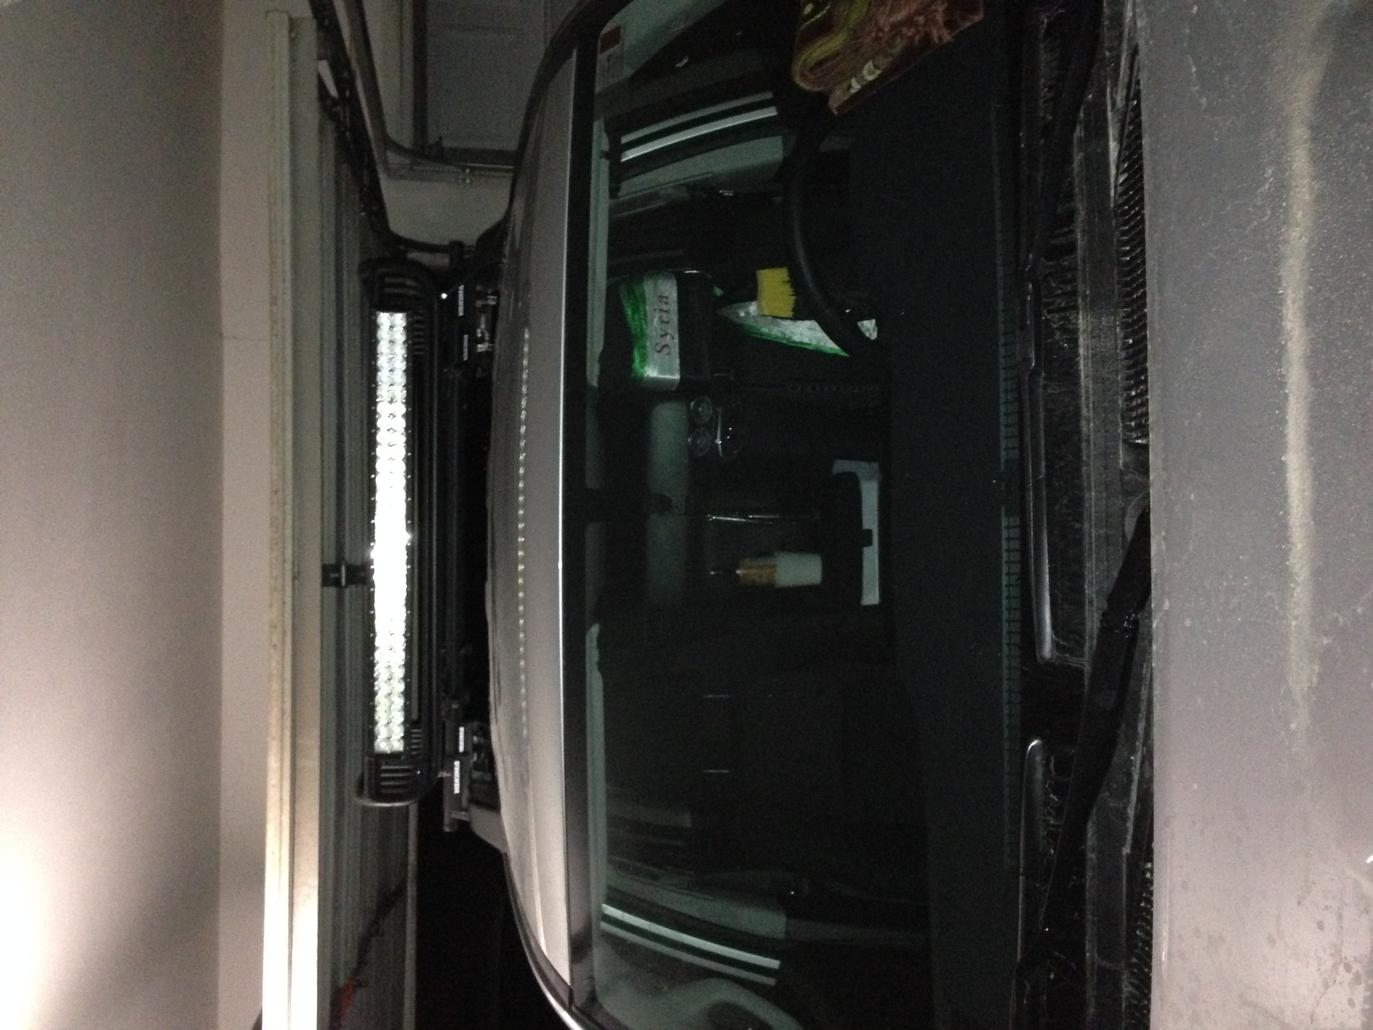 heavily requested installed pics of light bar w/ basket, spacers, and bar brightness-front-basket-view-jpg